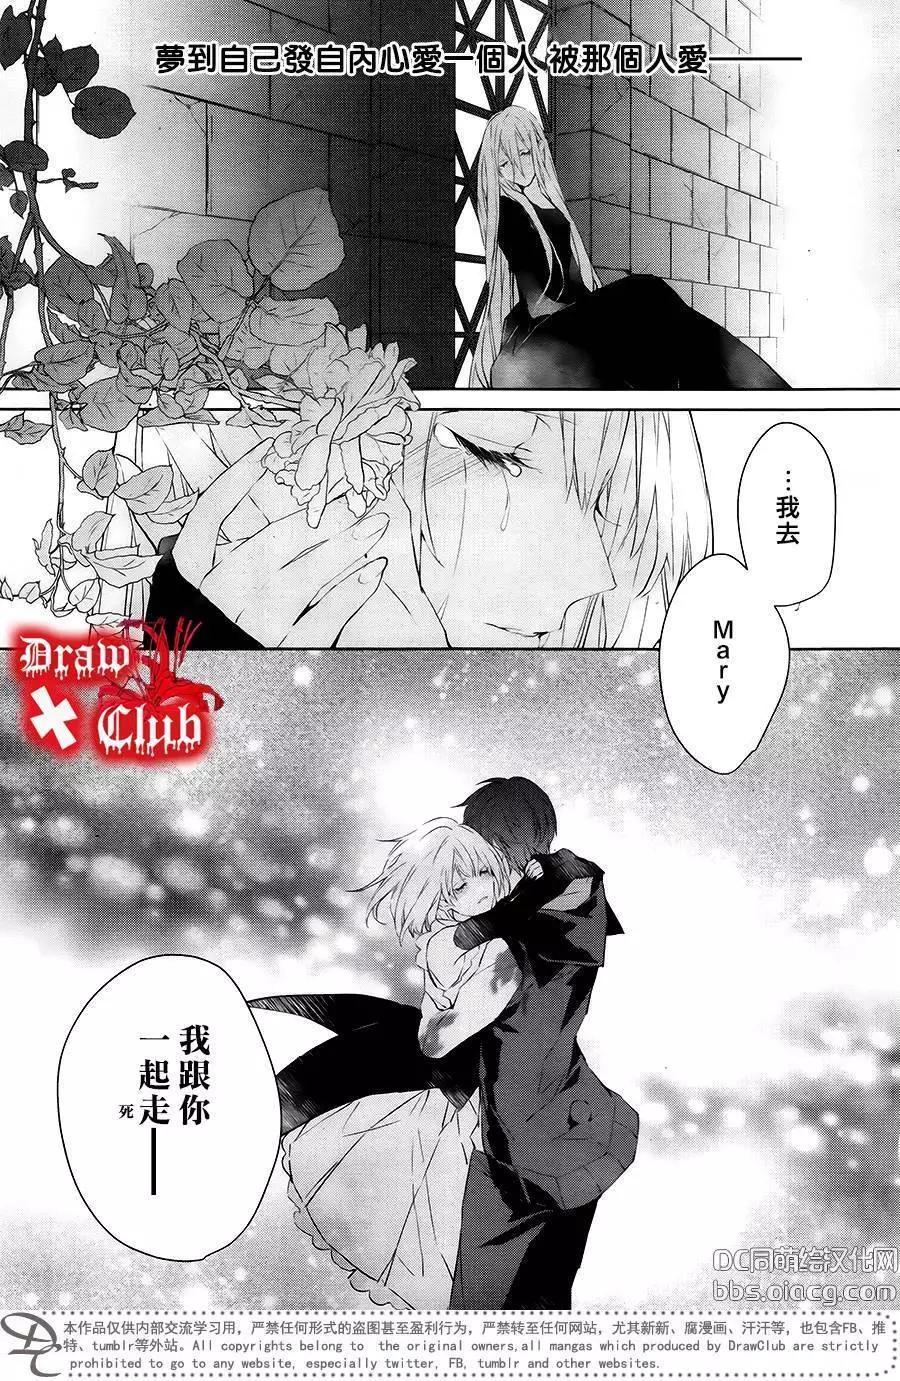 Bloody Mary - 第40回(1/2) - 8